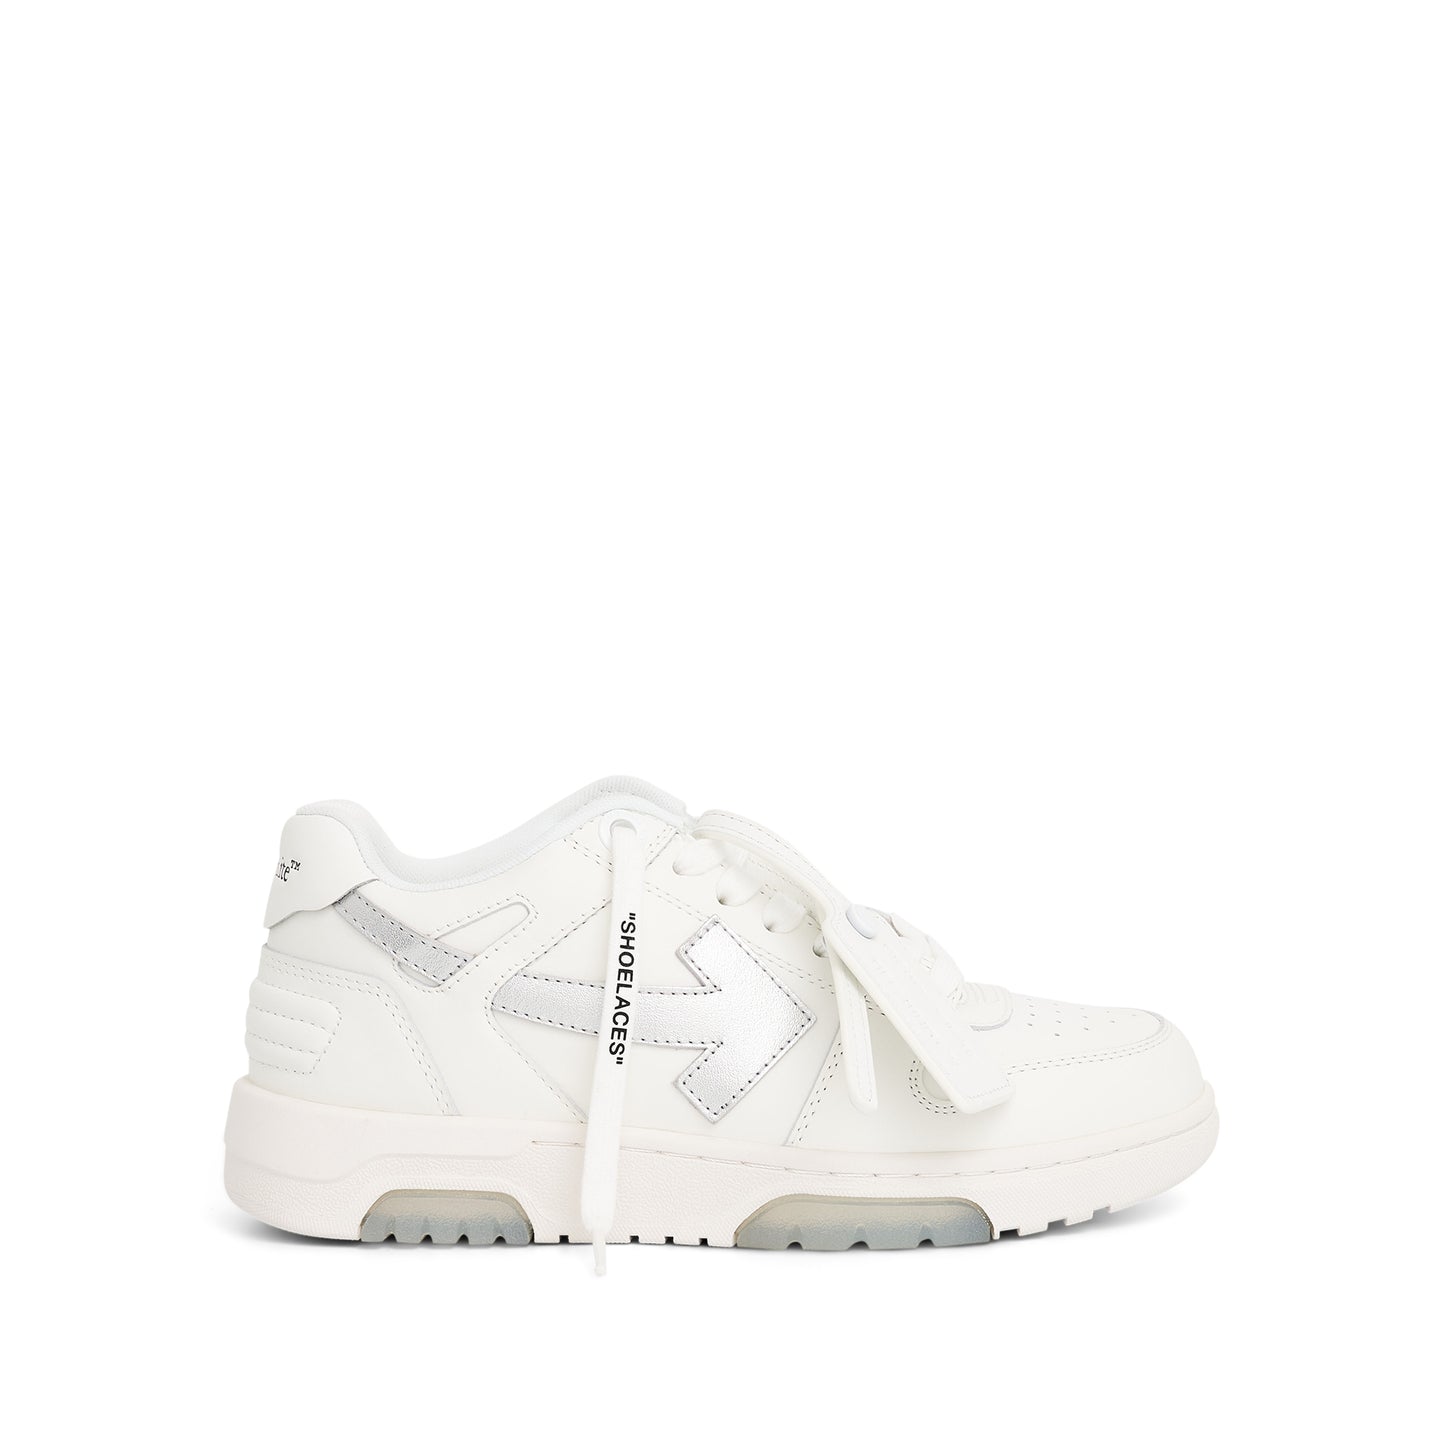 Out of Office Calf Leather Sneaker In Colour White/Silver